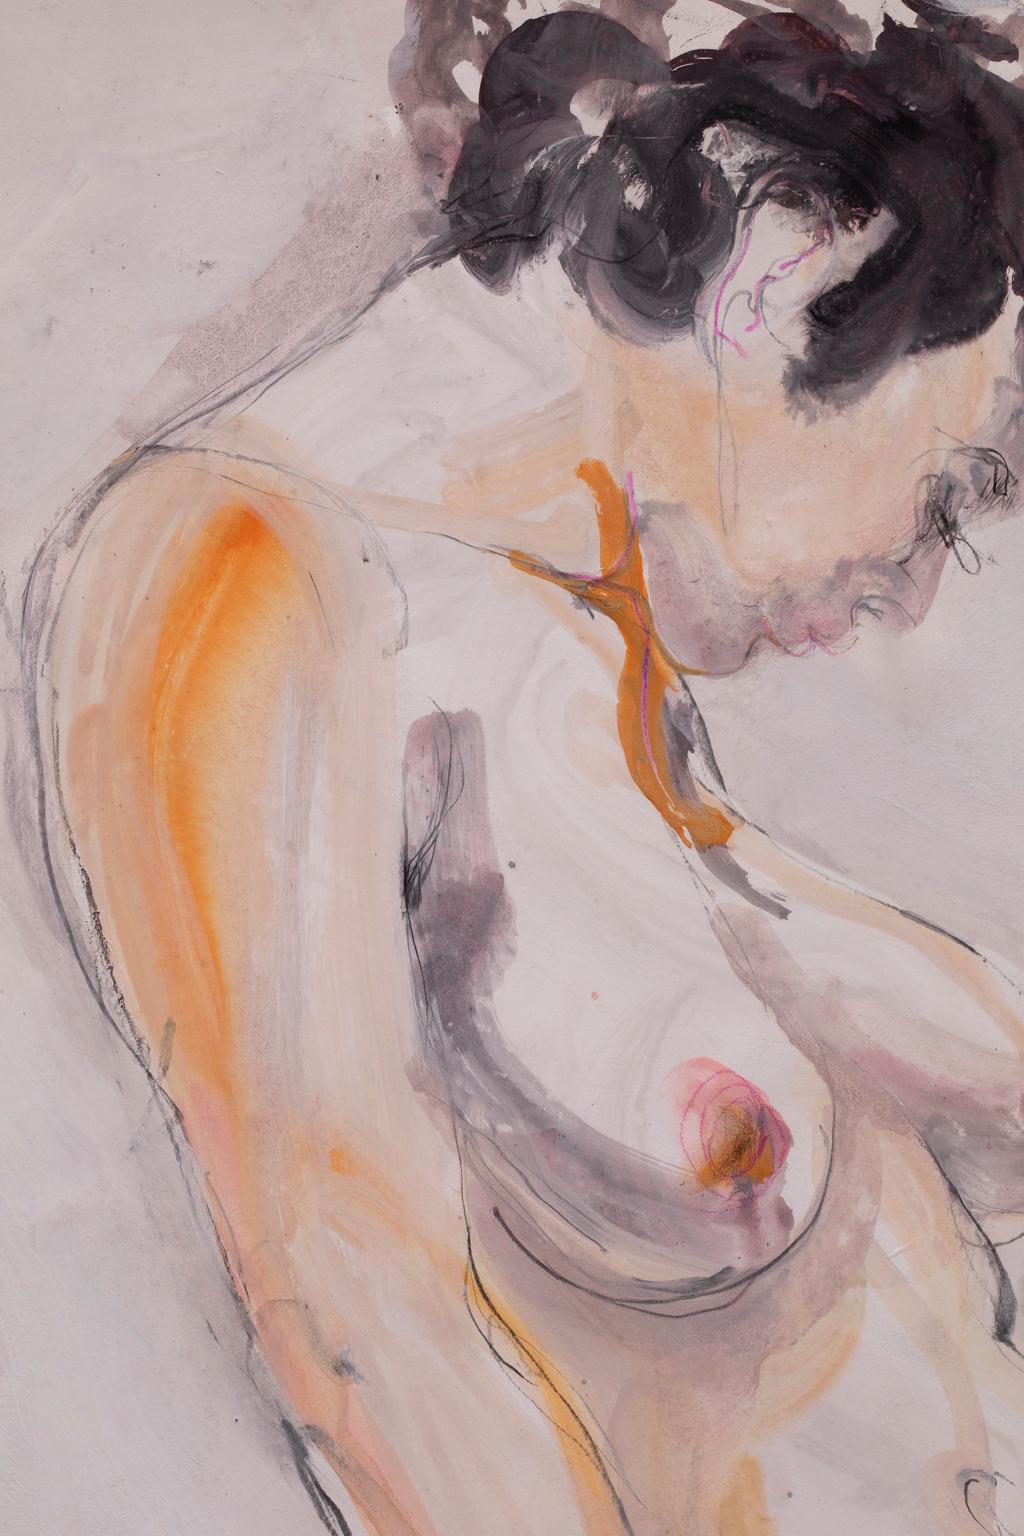 This mixed media on paper from the seminal artist Artis Lane is one of the many model paintings from her long and illustrious career. The subject is a nude standing in pose with her head turned downward. Artis Lane, in her many nudes, chose to